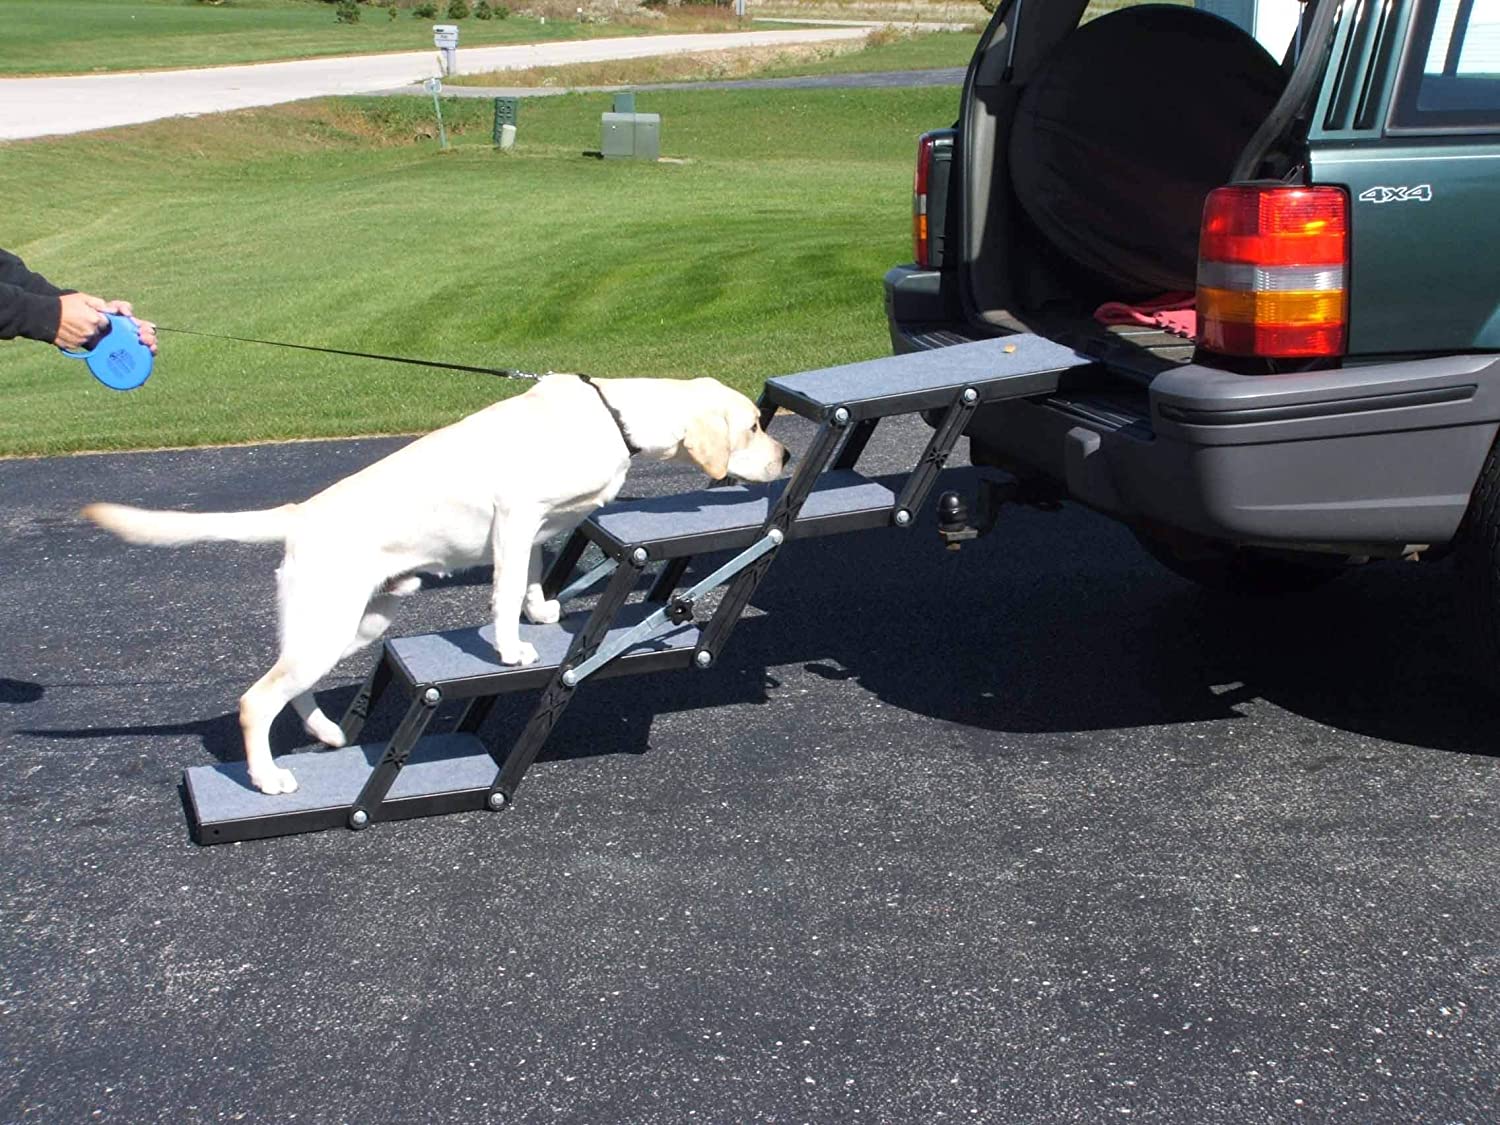 Dog stairs to help elderly dogs into car/automobile